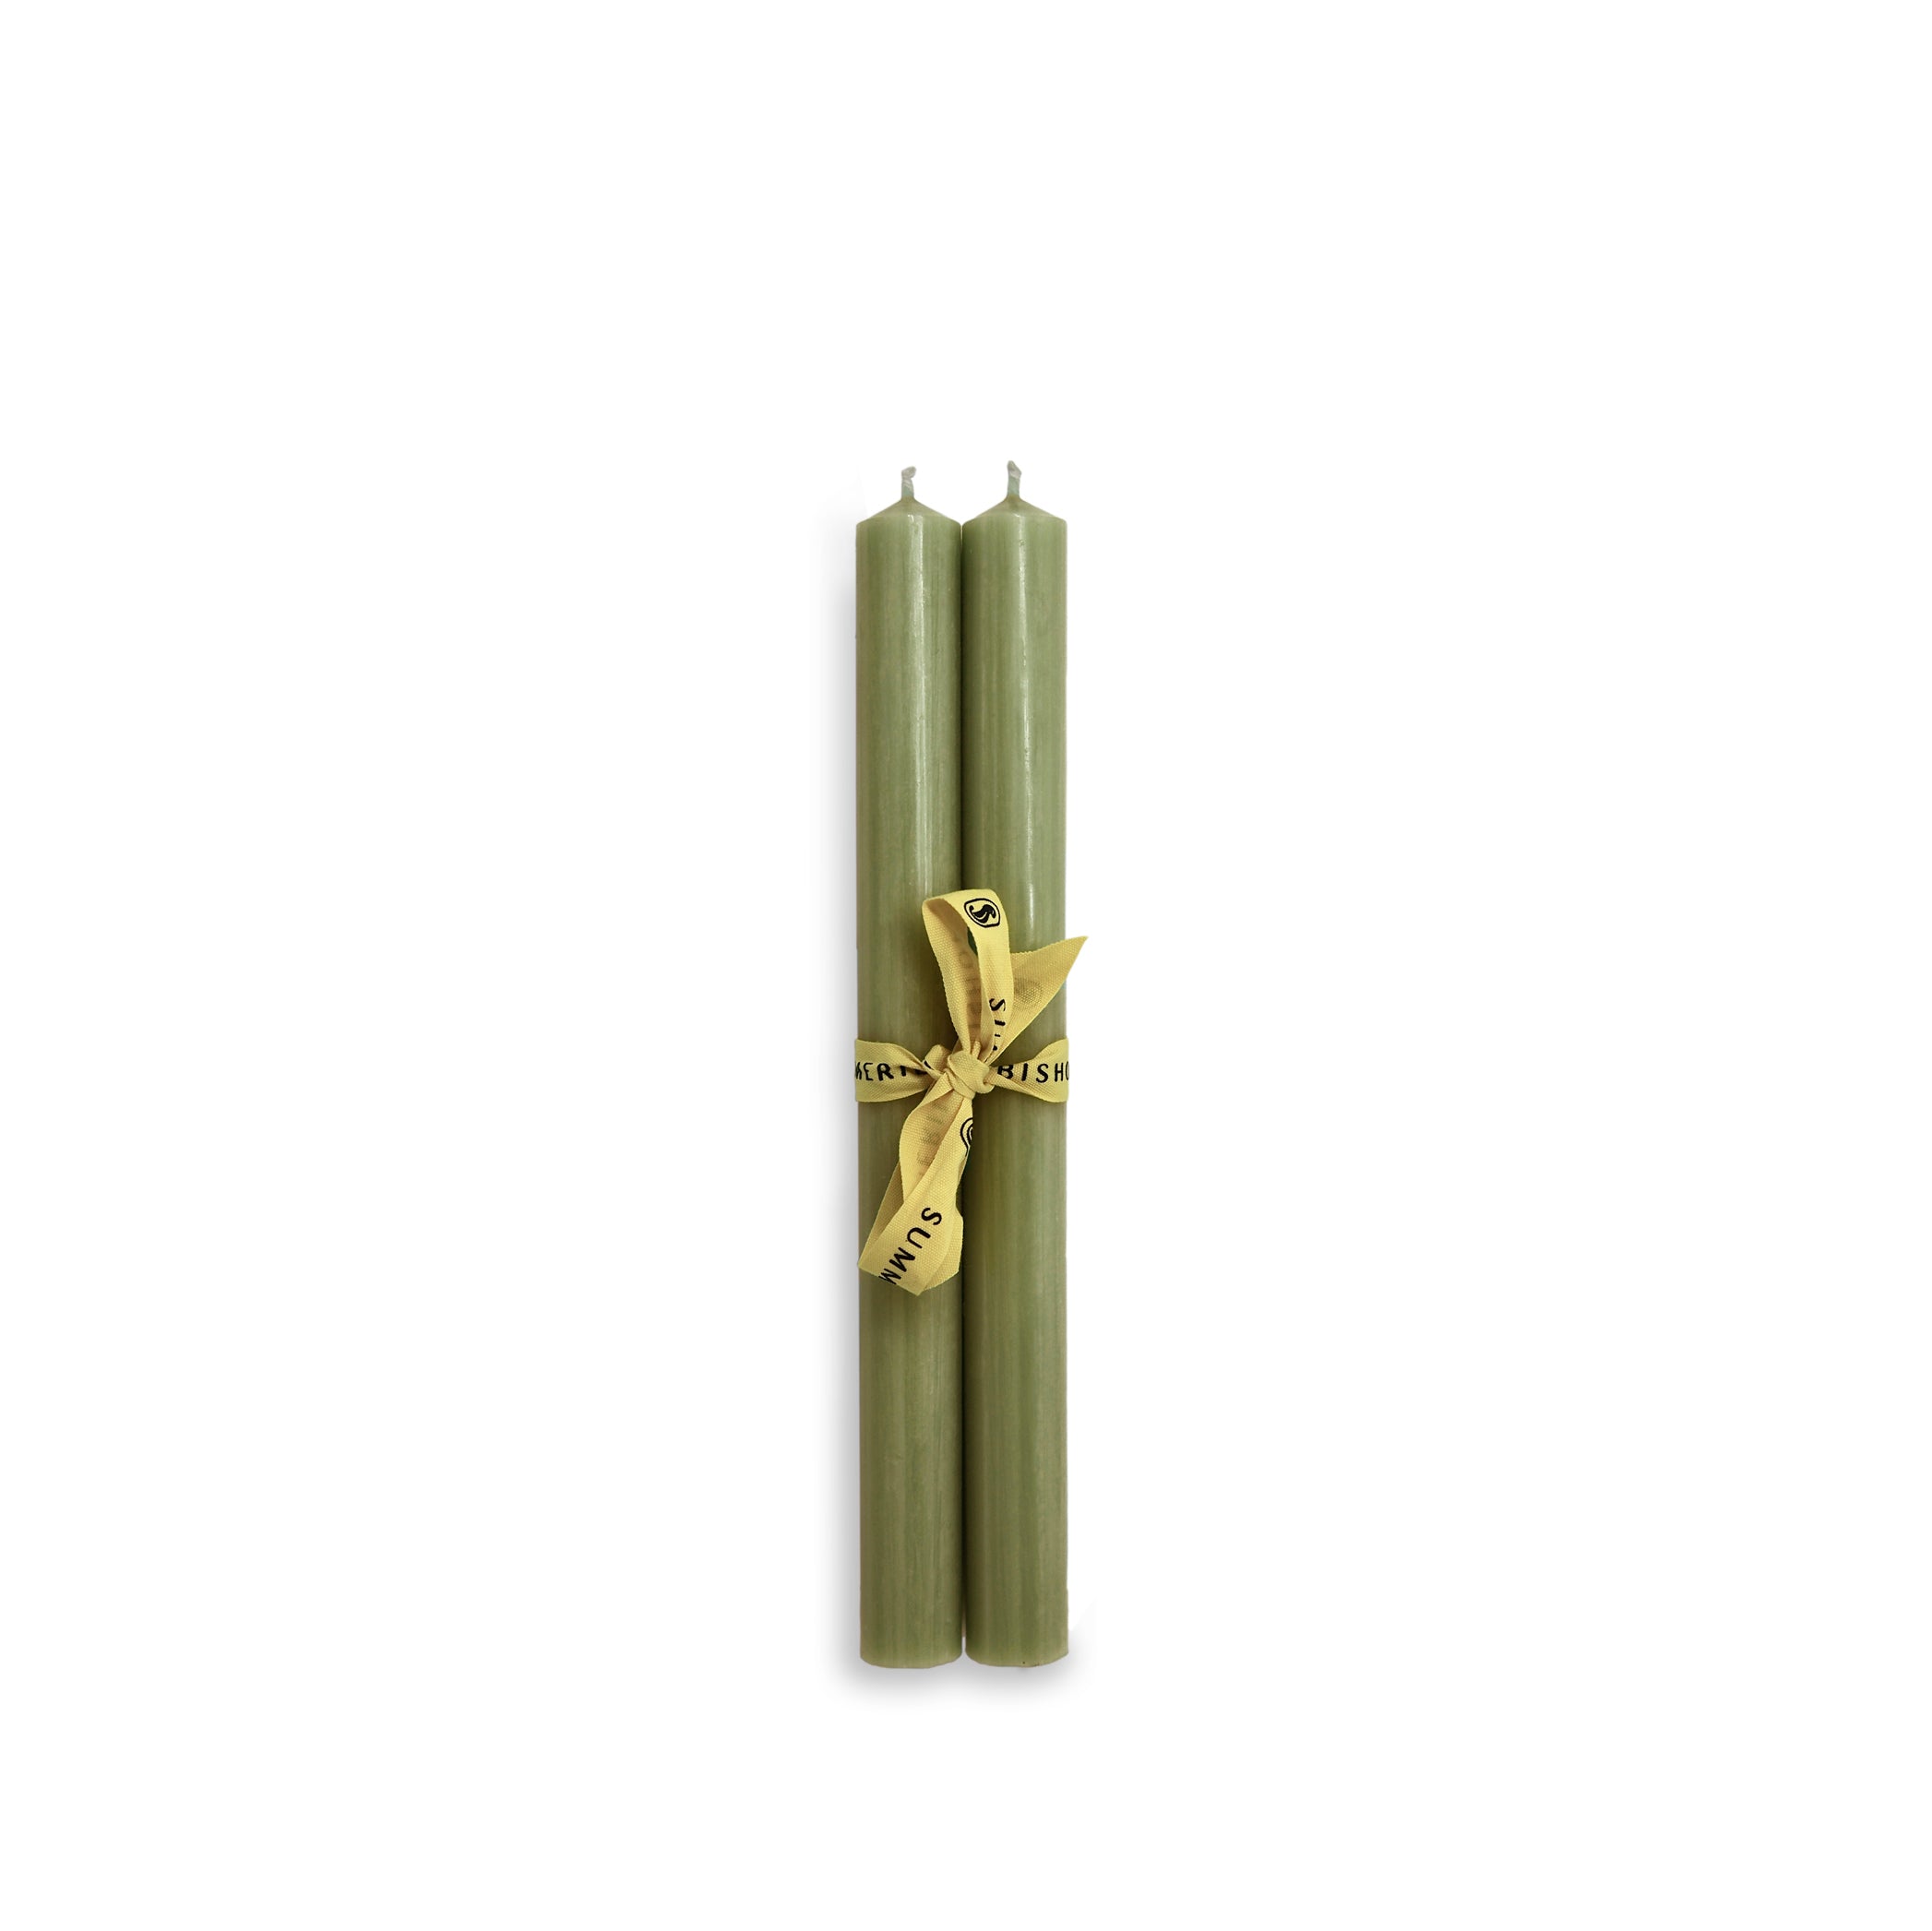 Pair of Coloured Church Candles in Olive Green